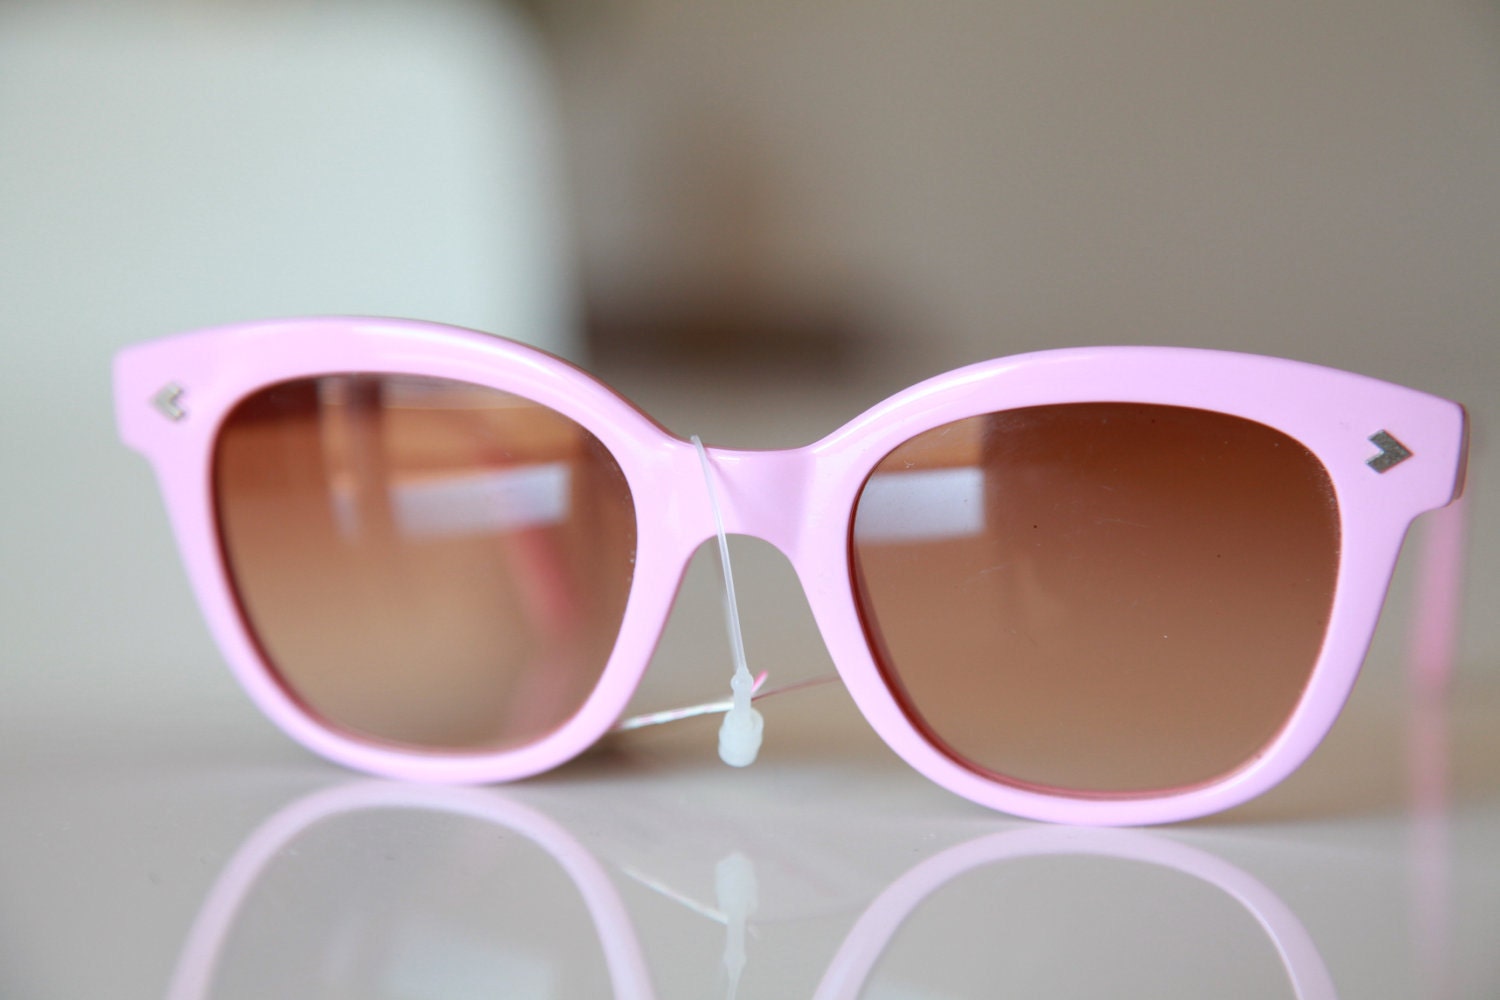 Vintage Wayfarer Sunglasses Hot Pink/ Chrome/ Pink by Polaroid . REDUCED. Gift Certificates Apply